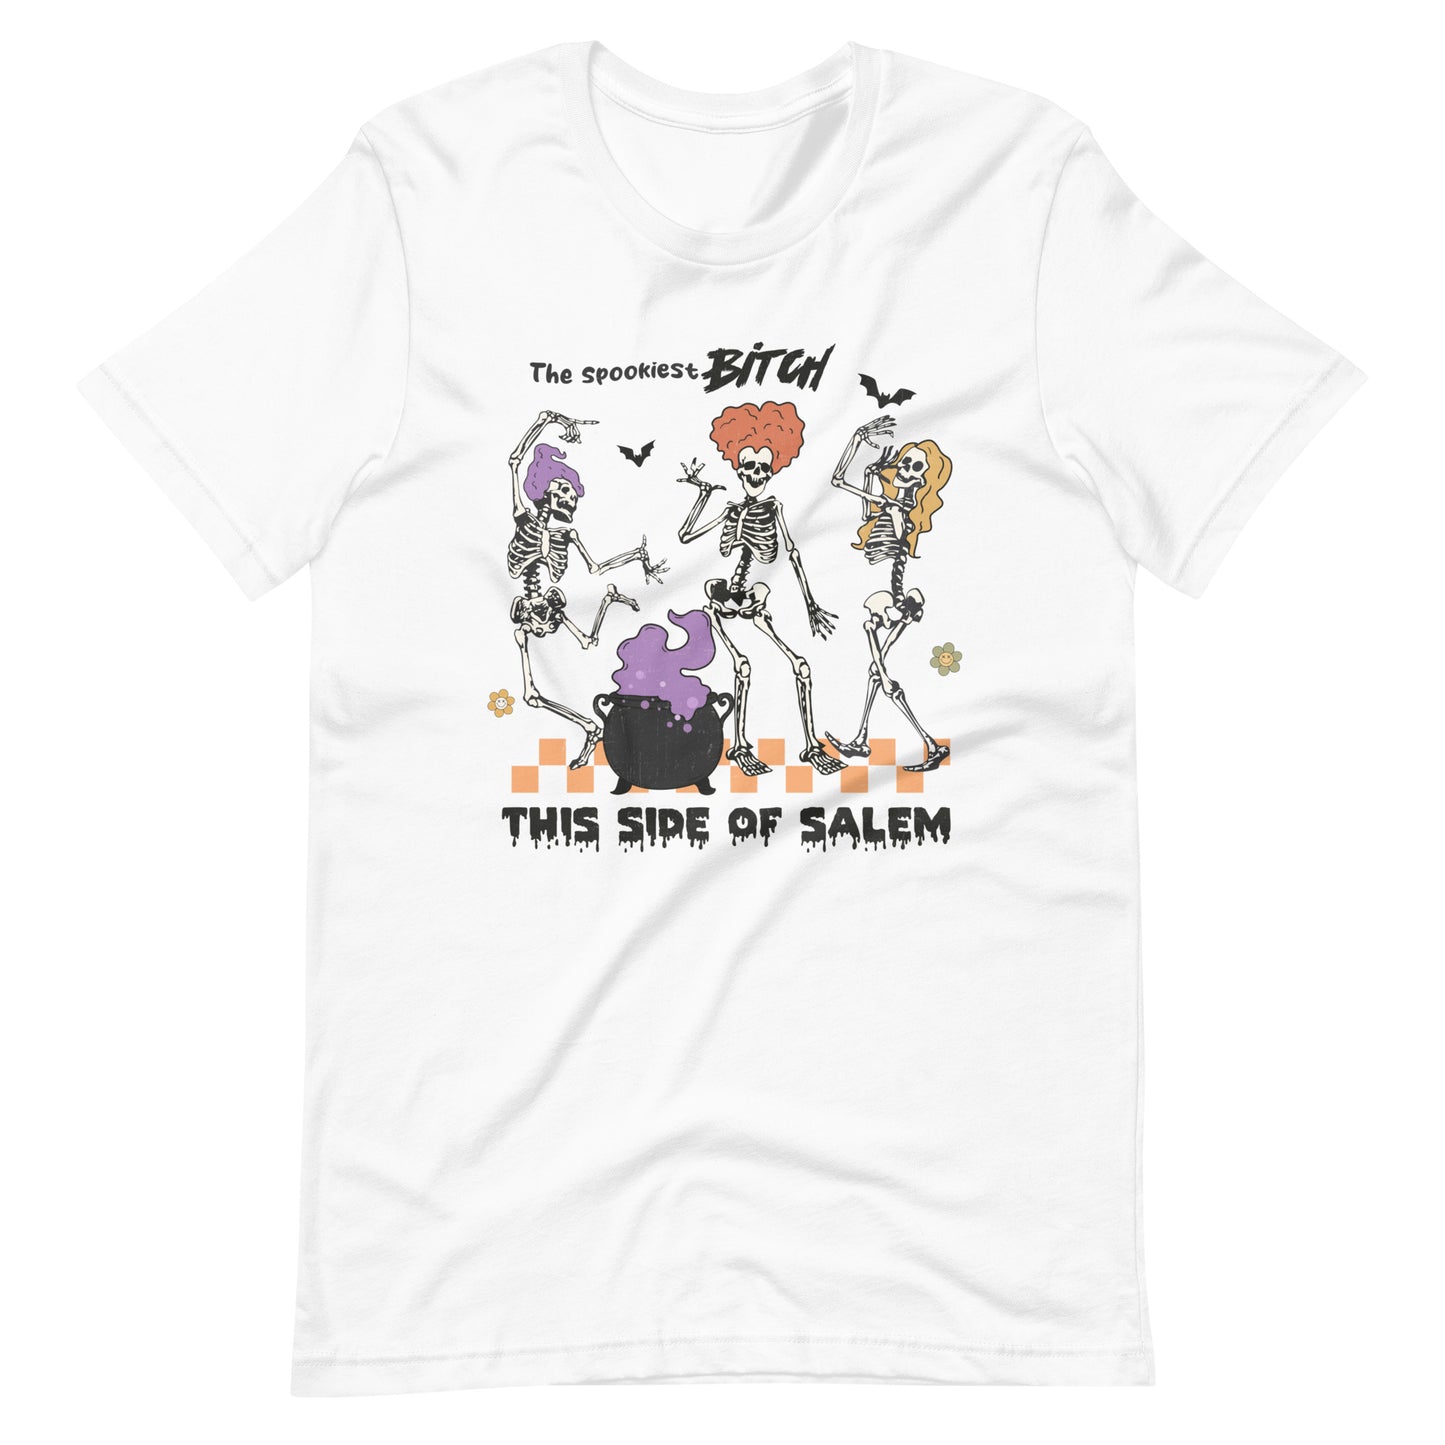 The Spookiest Bitch this side of Salem Sisters Skeleton Halloween Spooky Unisex t-shirt